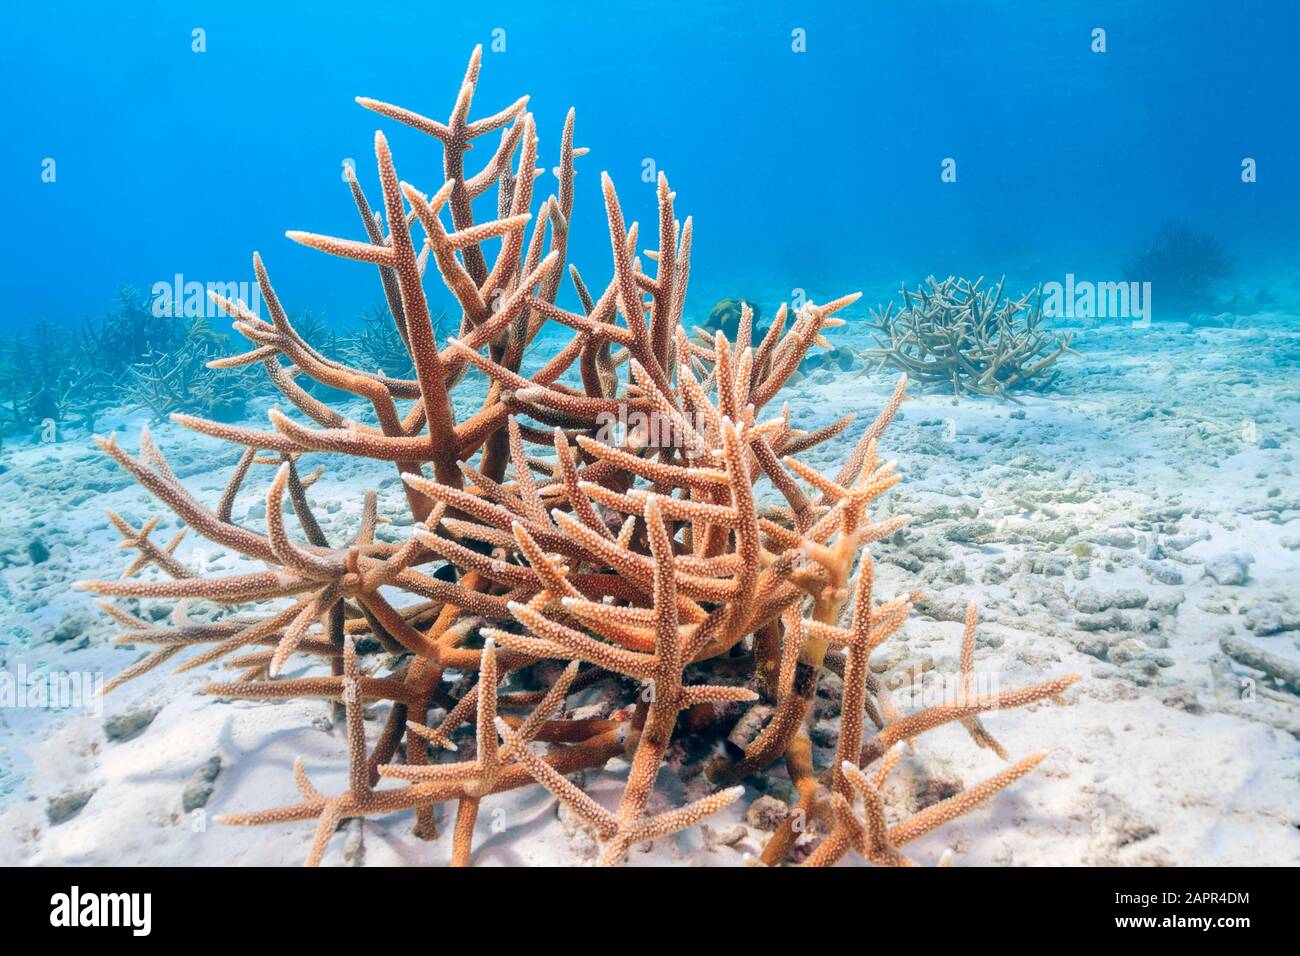 Caribbean coral reef off the coast of the island of Bonaire staghorn coral Stock Photo